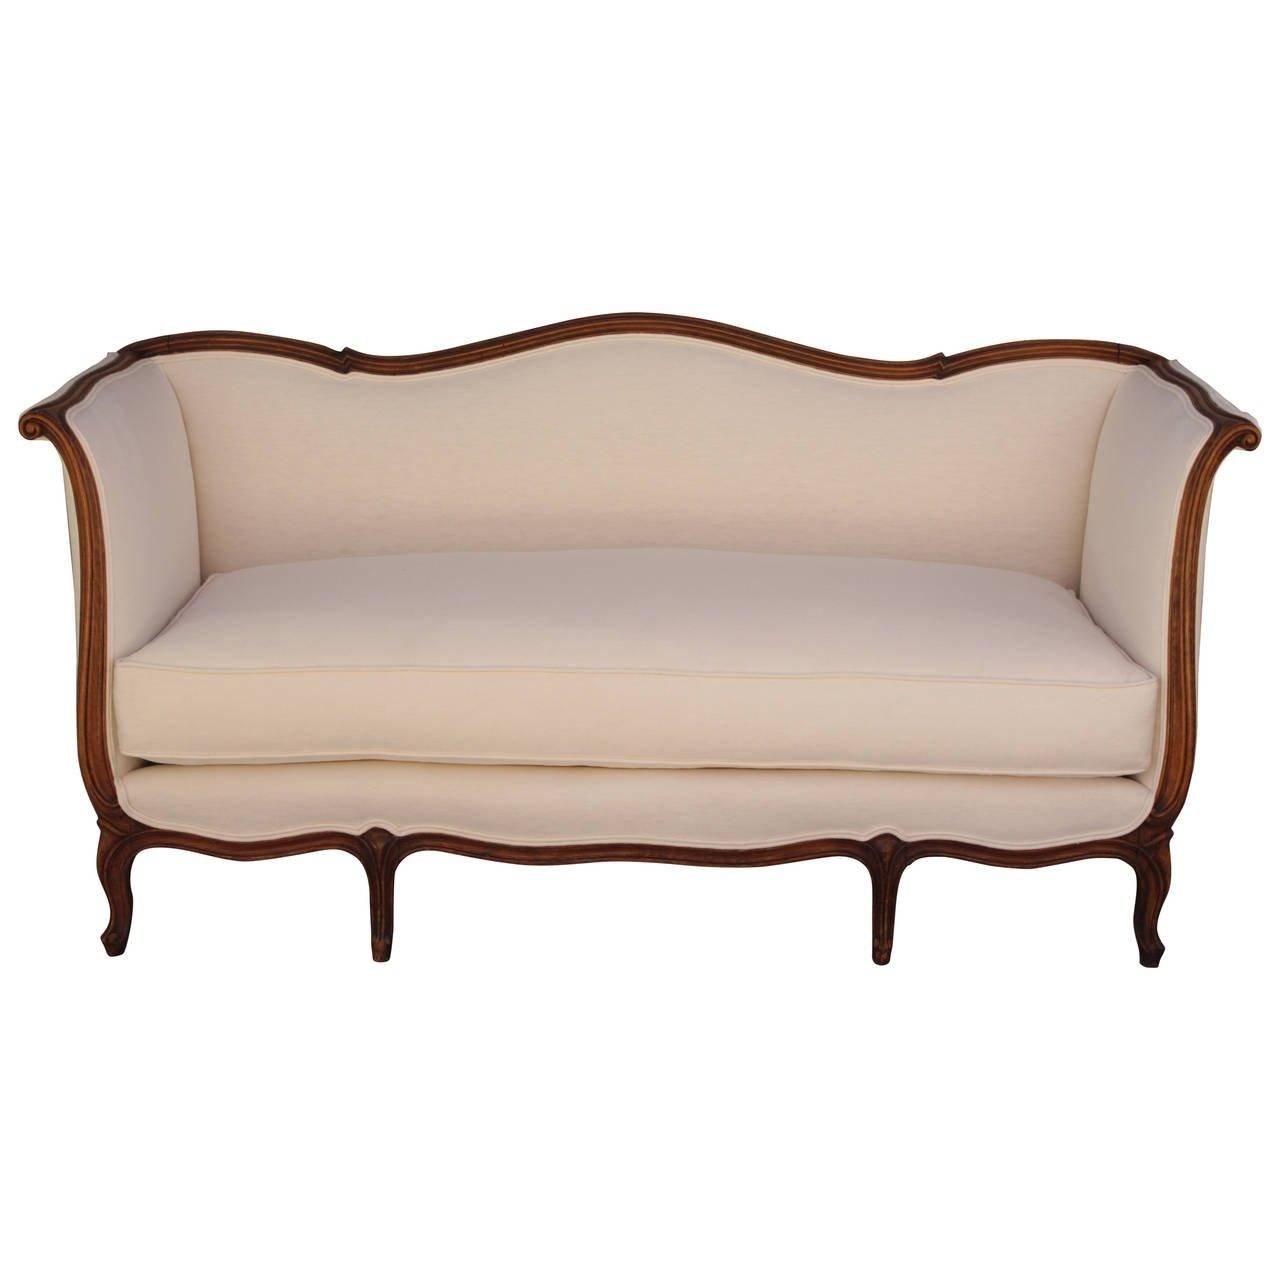 French Louis Xv Style Sofa With Linen Upholstery At 1stdibs Throughout French Style Sofa (View 2 of 20)